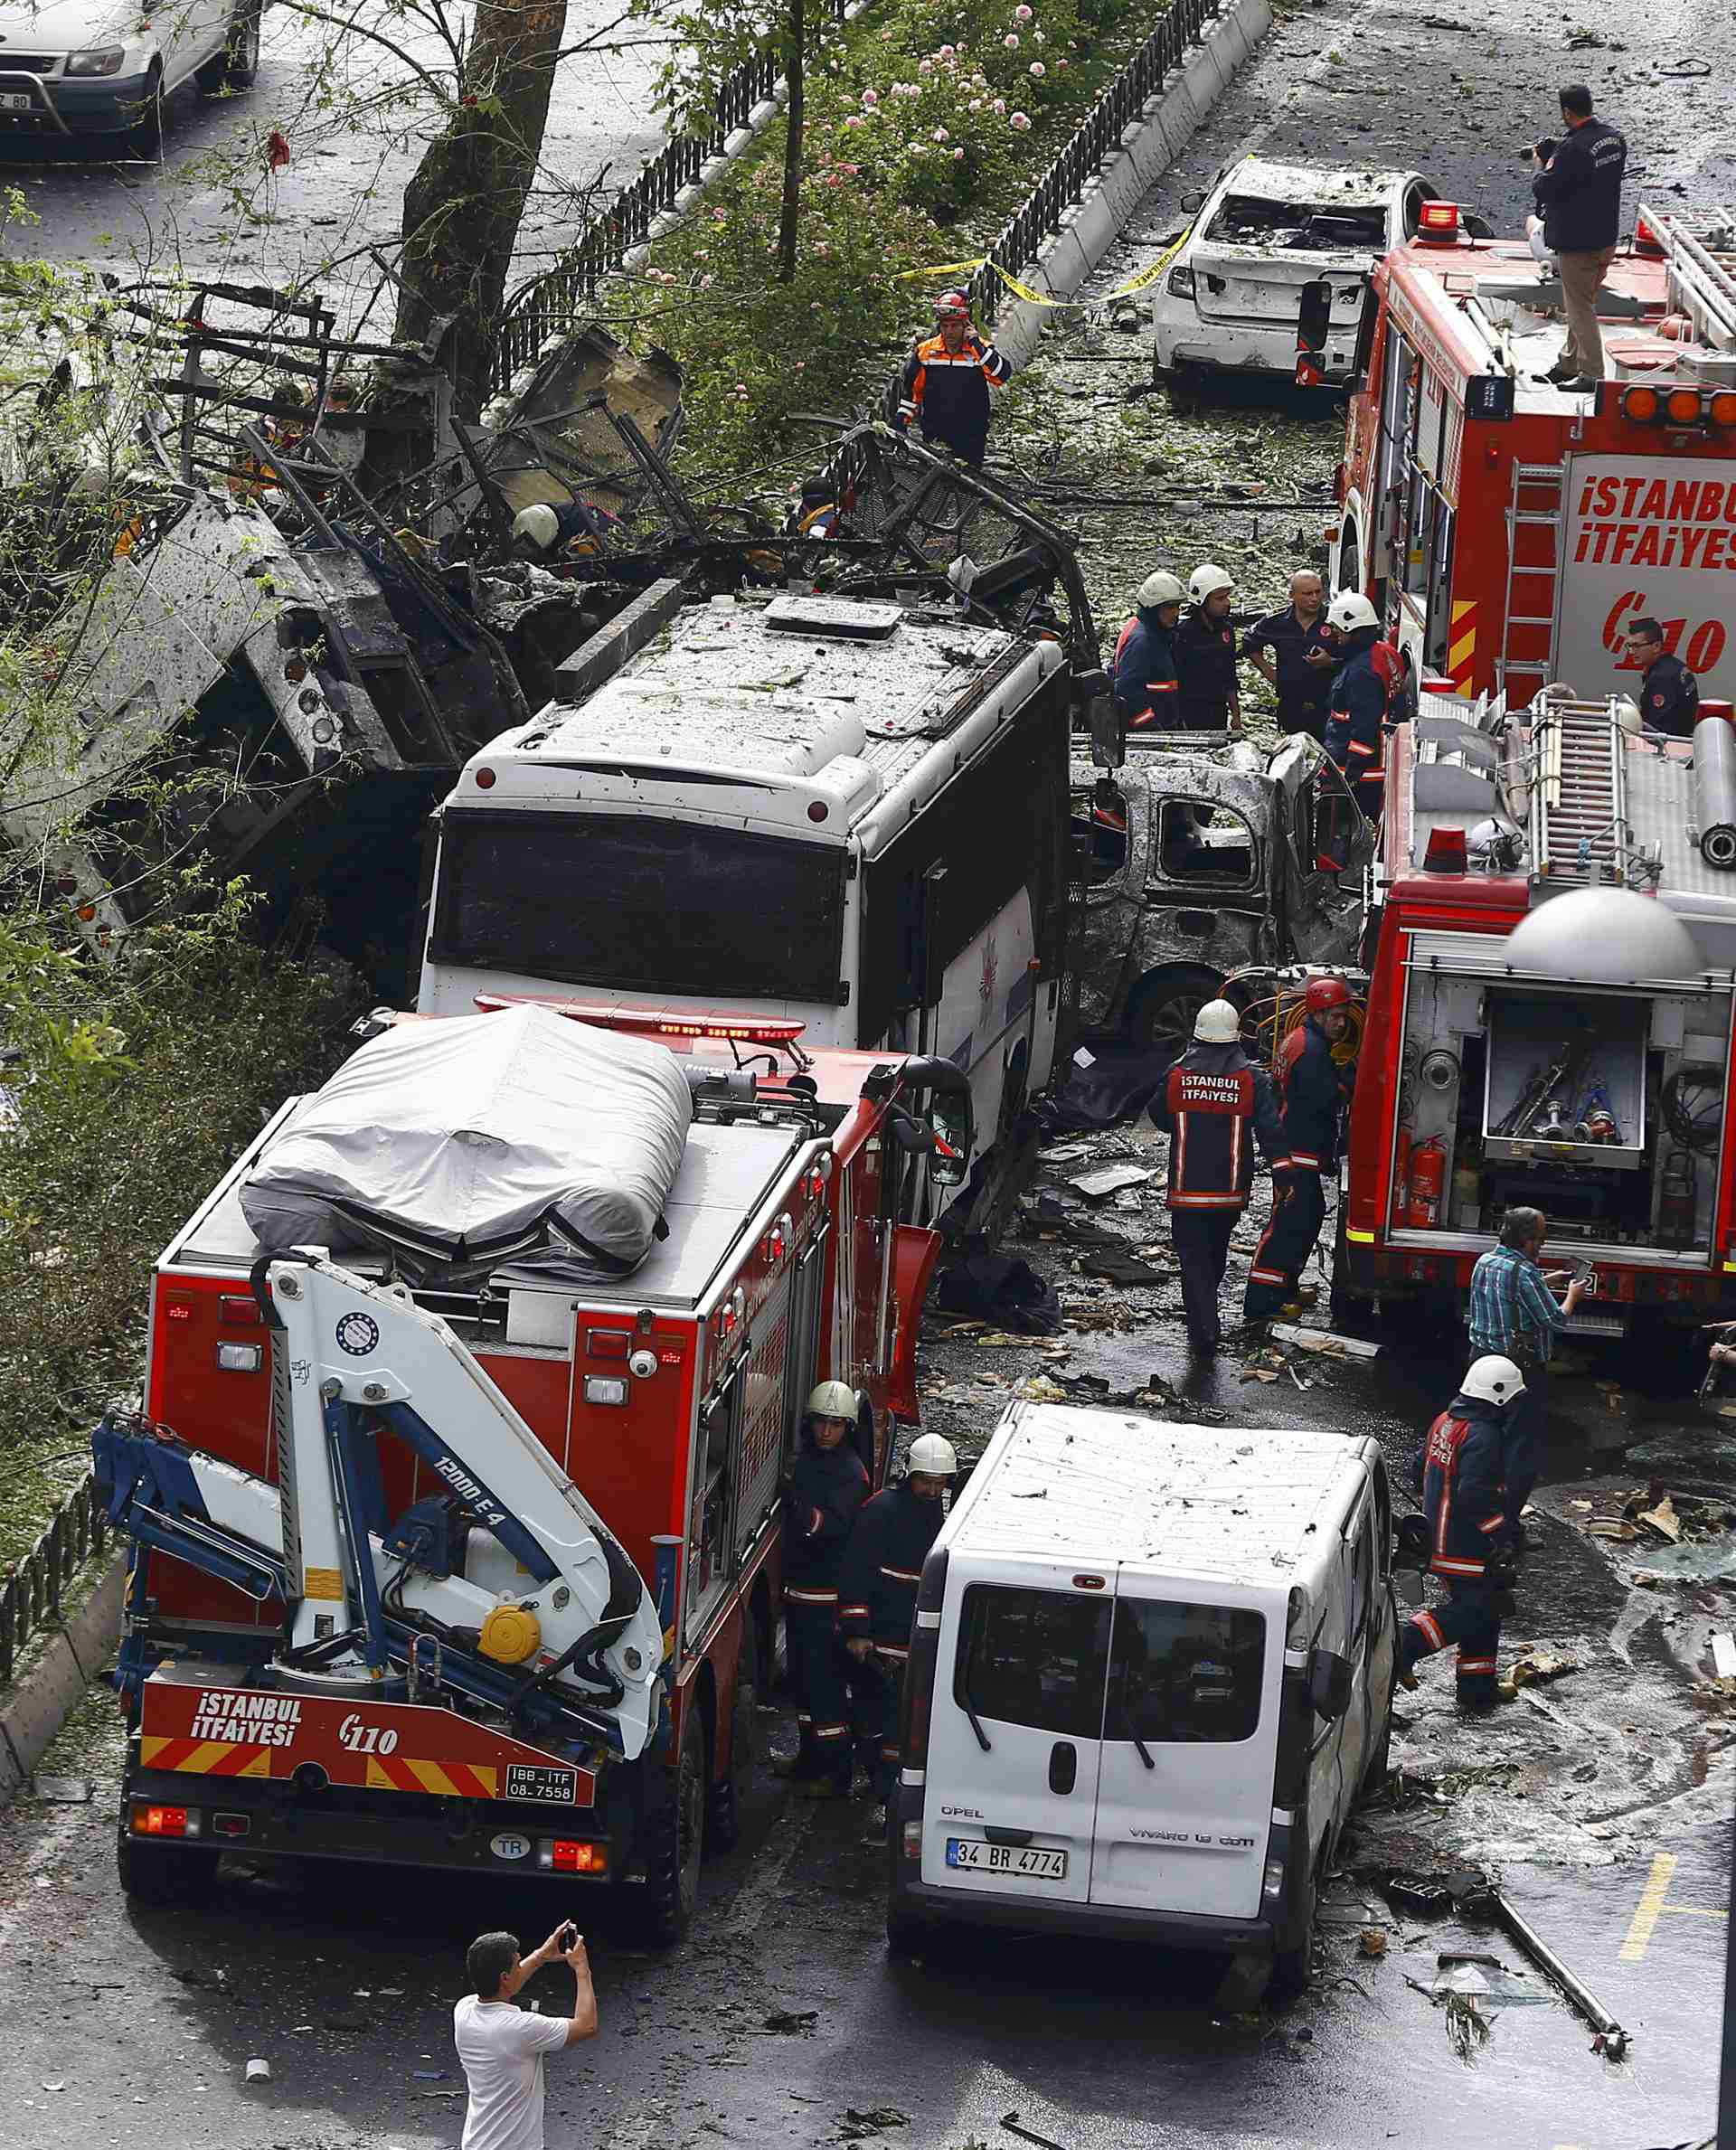 Fire engines stand beside a Turkish police bus which was targeted in a bomb attack in a central Istanbul district